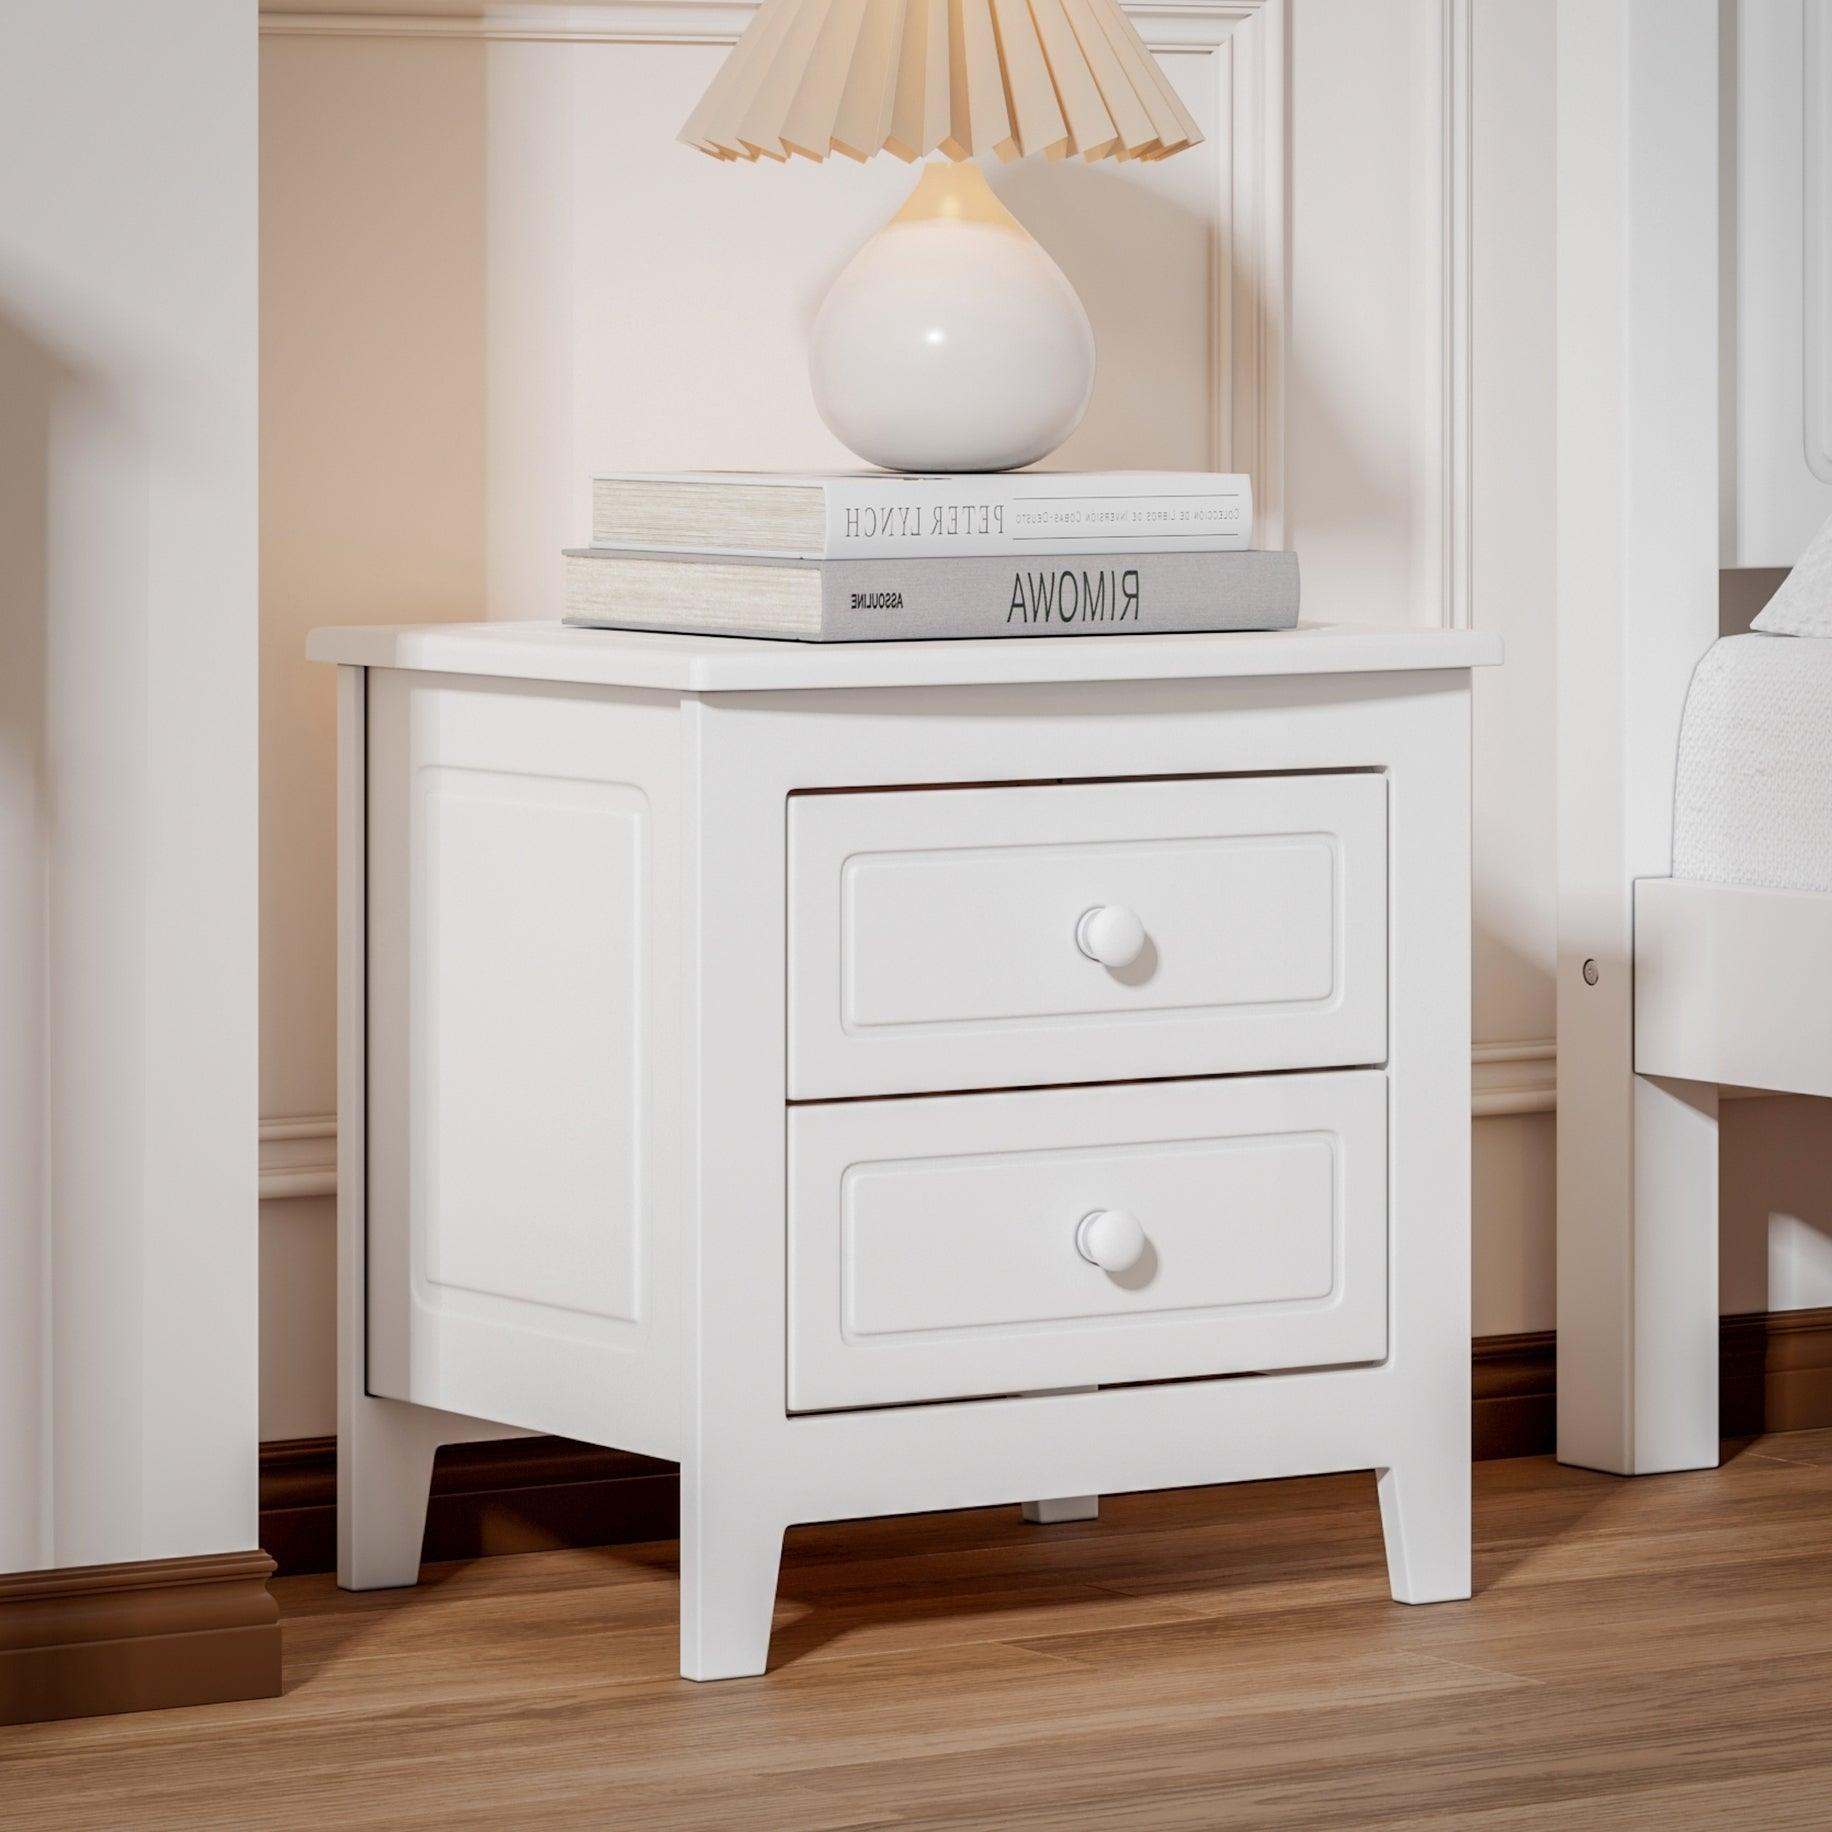 🆓🚛 2-Drawer Nightstand for Bedroom, Mid Century Retro Bedside Table With Classic Design, White